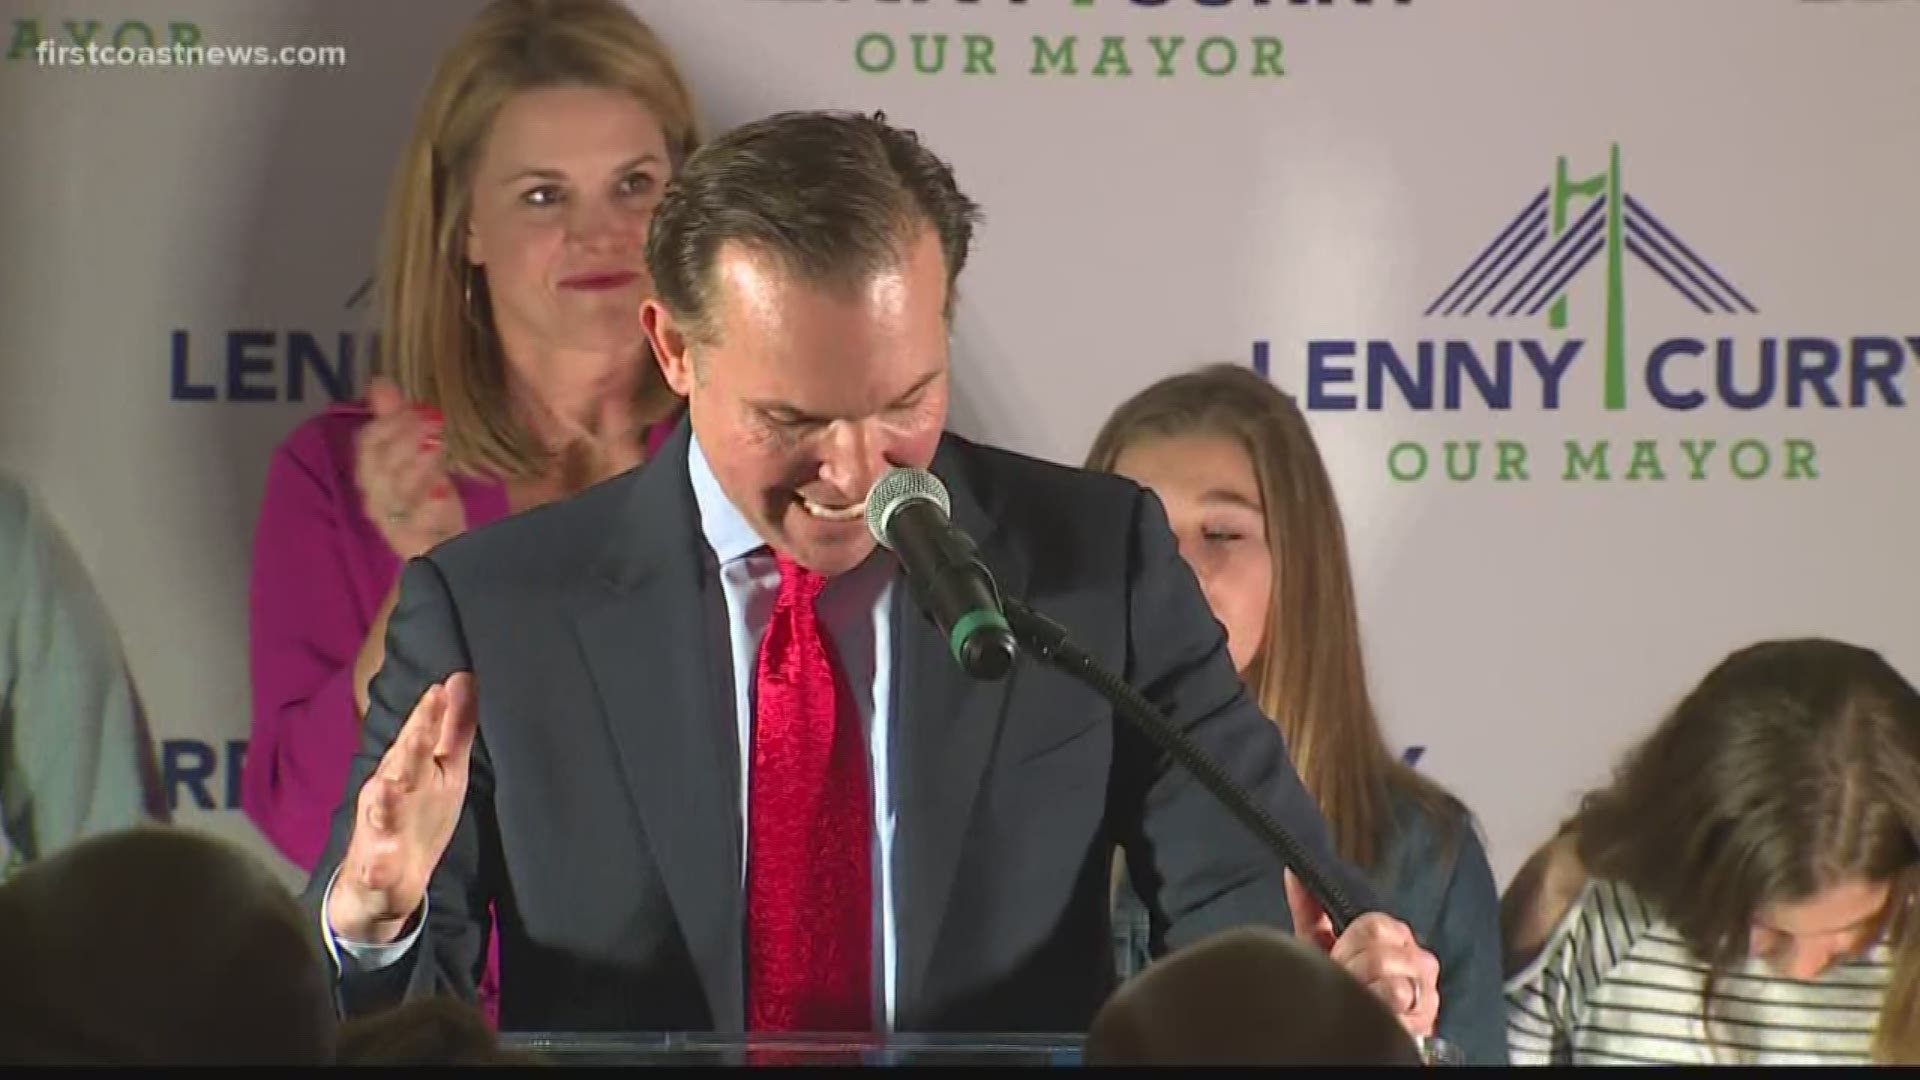 Mayor Lenny Curry and Sheriff Mike Williams both won re-election Tuesday night in the 2019 Duval County elections.